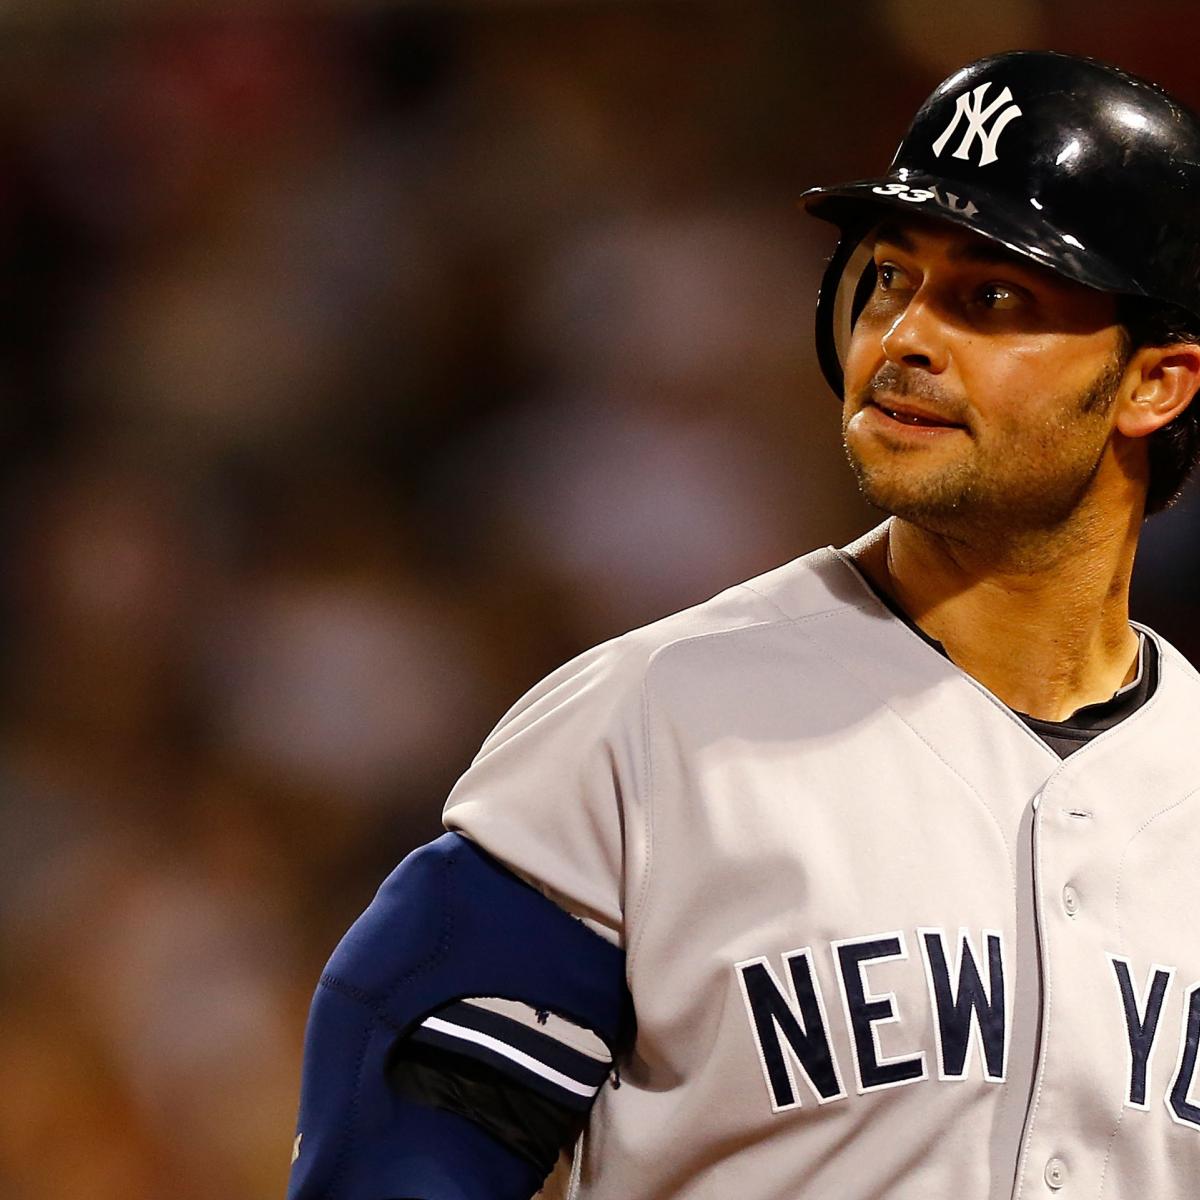 Nick Swisher - Contact Info, Agent, Manager